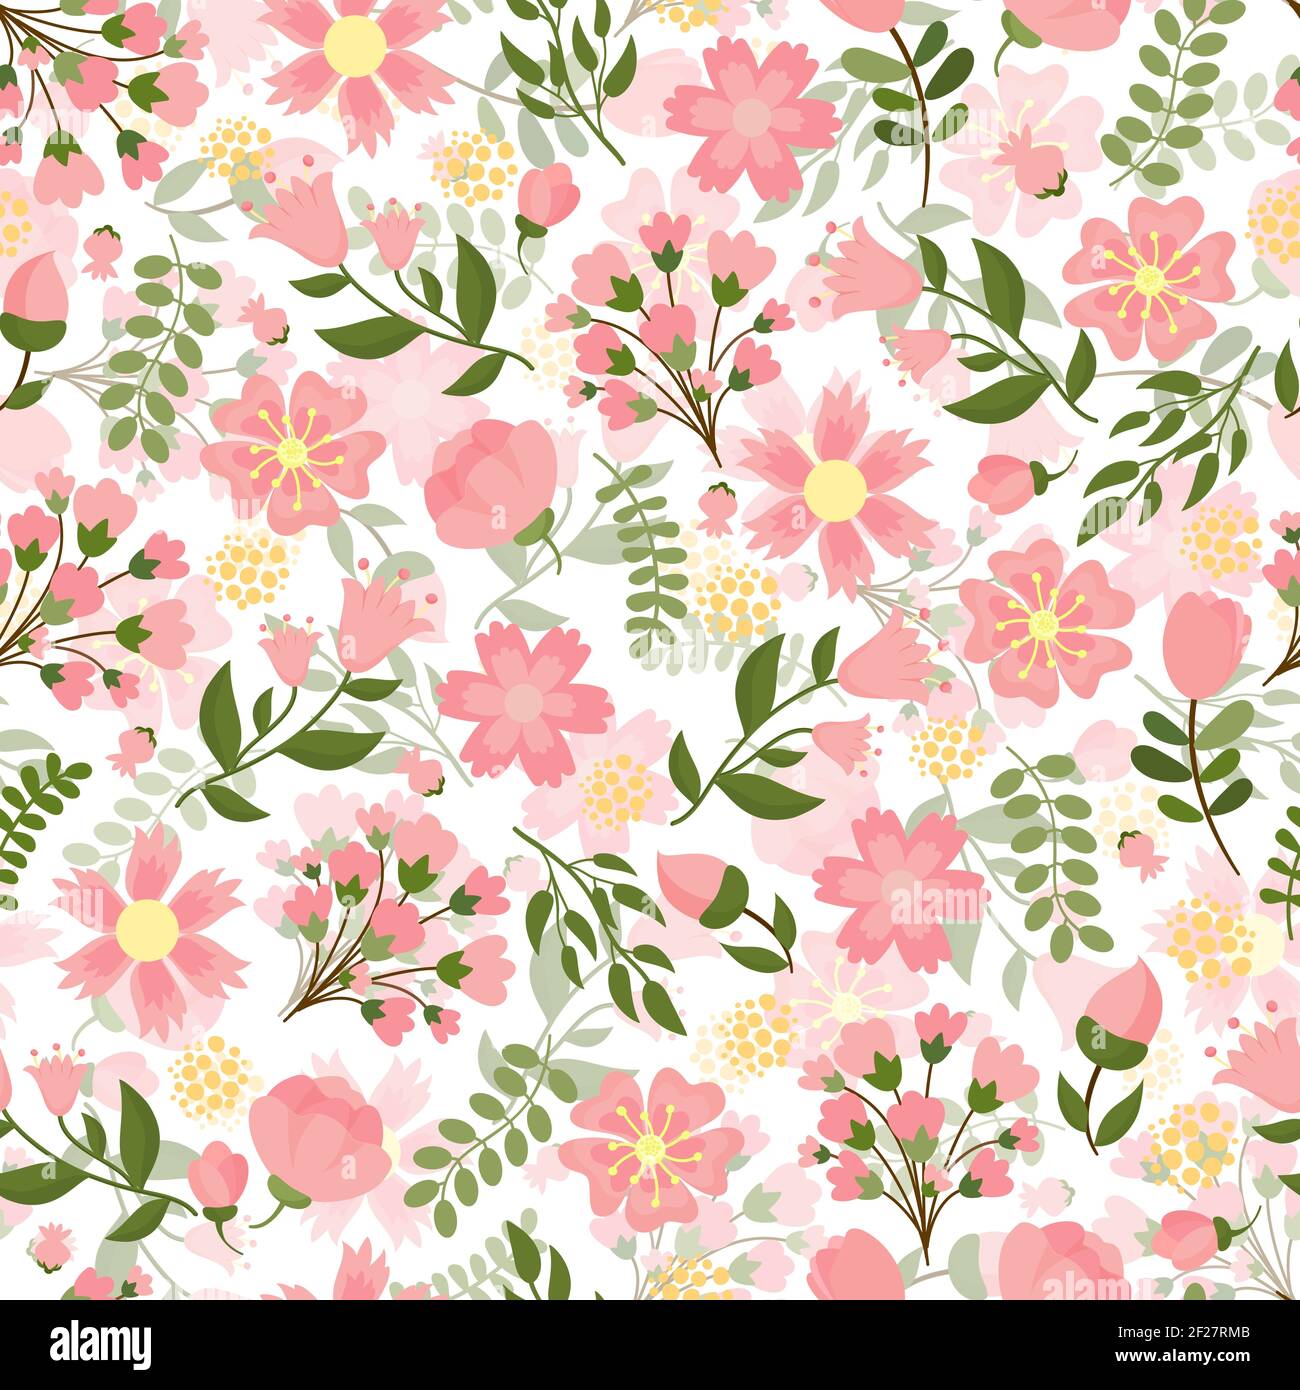 https://c8.alamy.com/comp/2F27RMB/seamless-spring-floral-background-with-a-dense-pattern-of-pretty-pink-blossom-and-flowers-with-green-leaves-in-square-format-suitable-for-wallpaper-an-2F27RMB.jpg